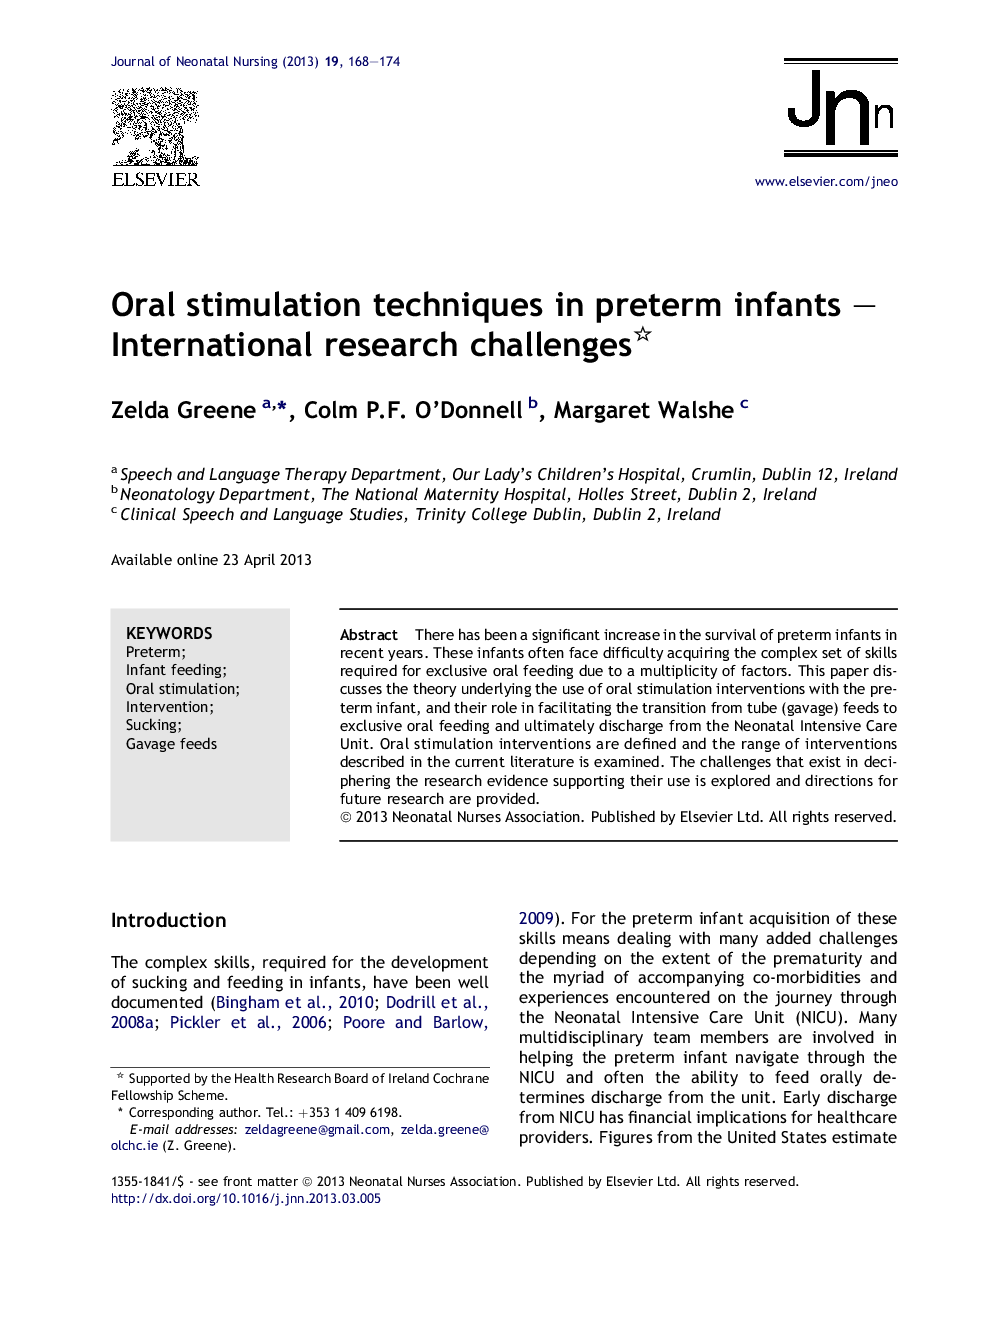 Oral stimulation techniques in preterm infants – International research challenges 